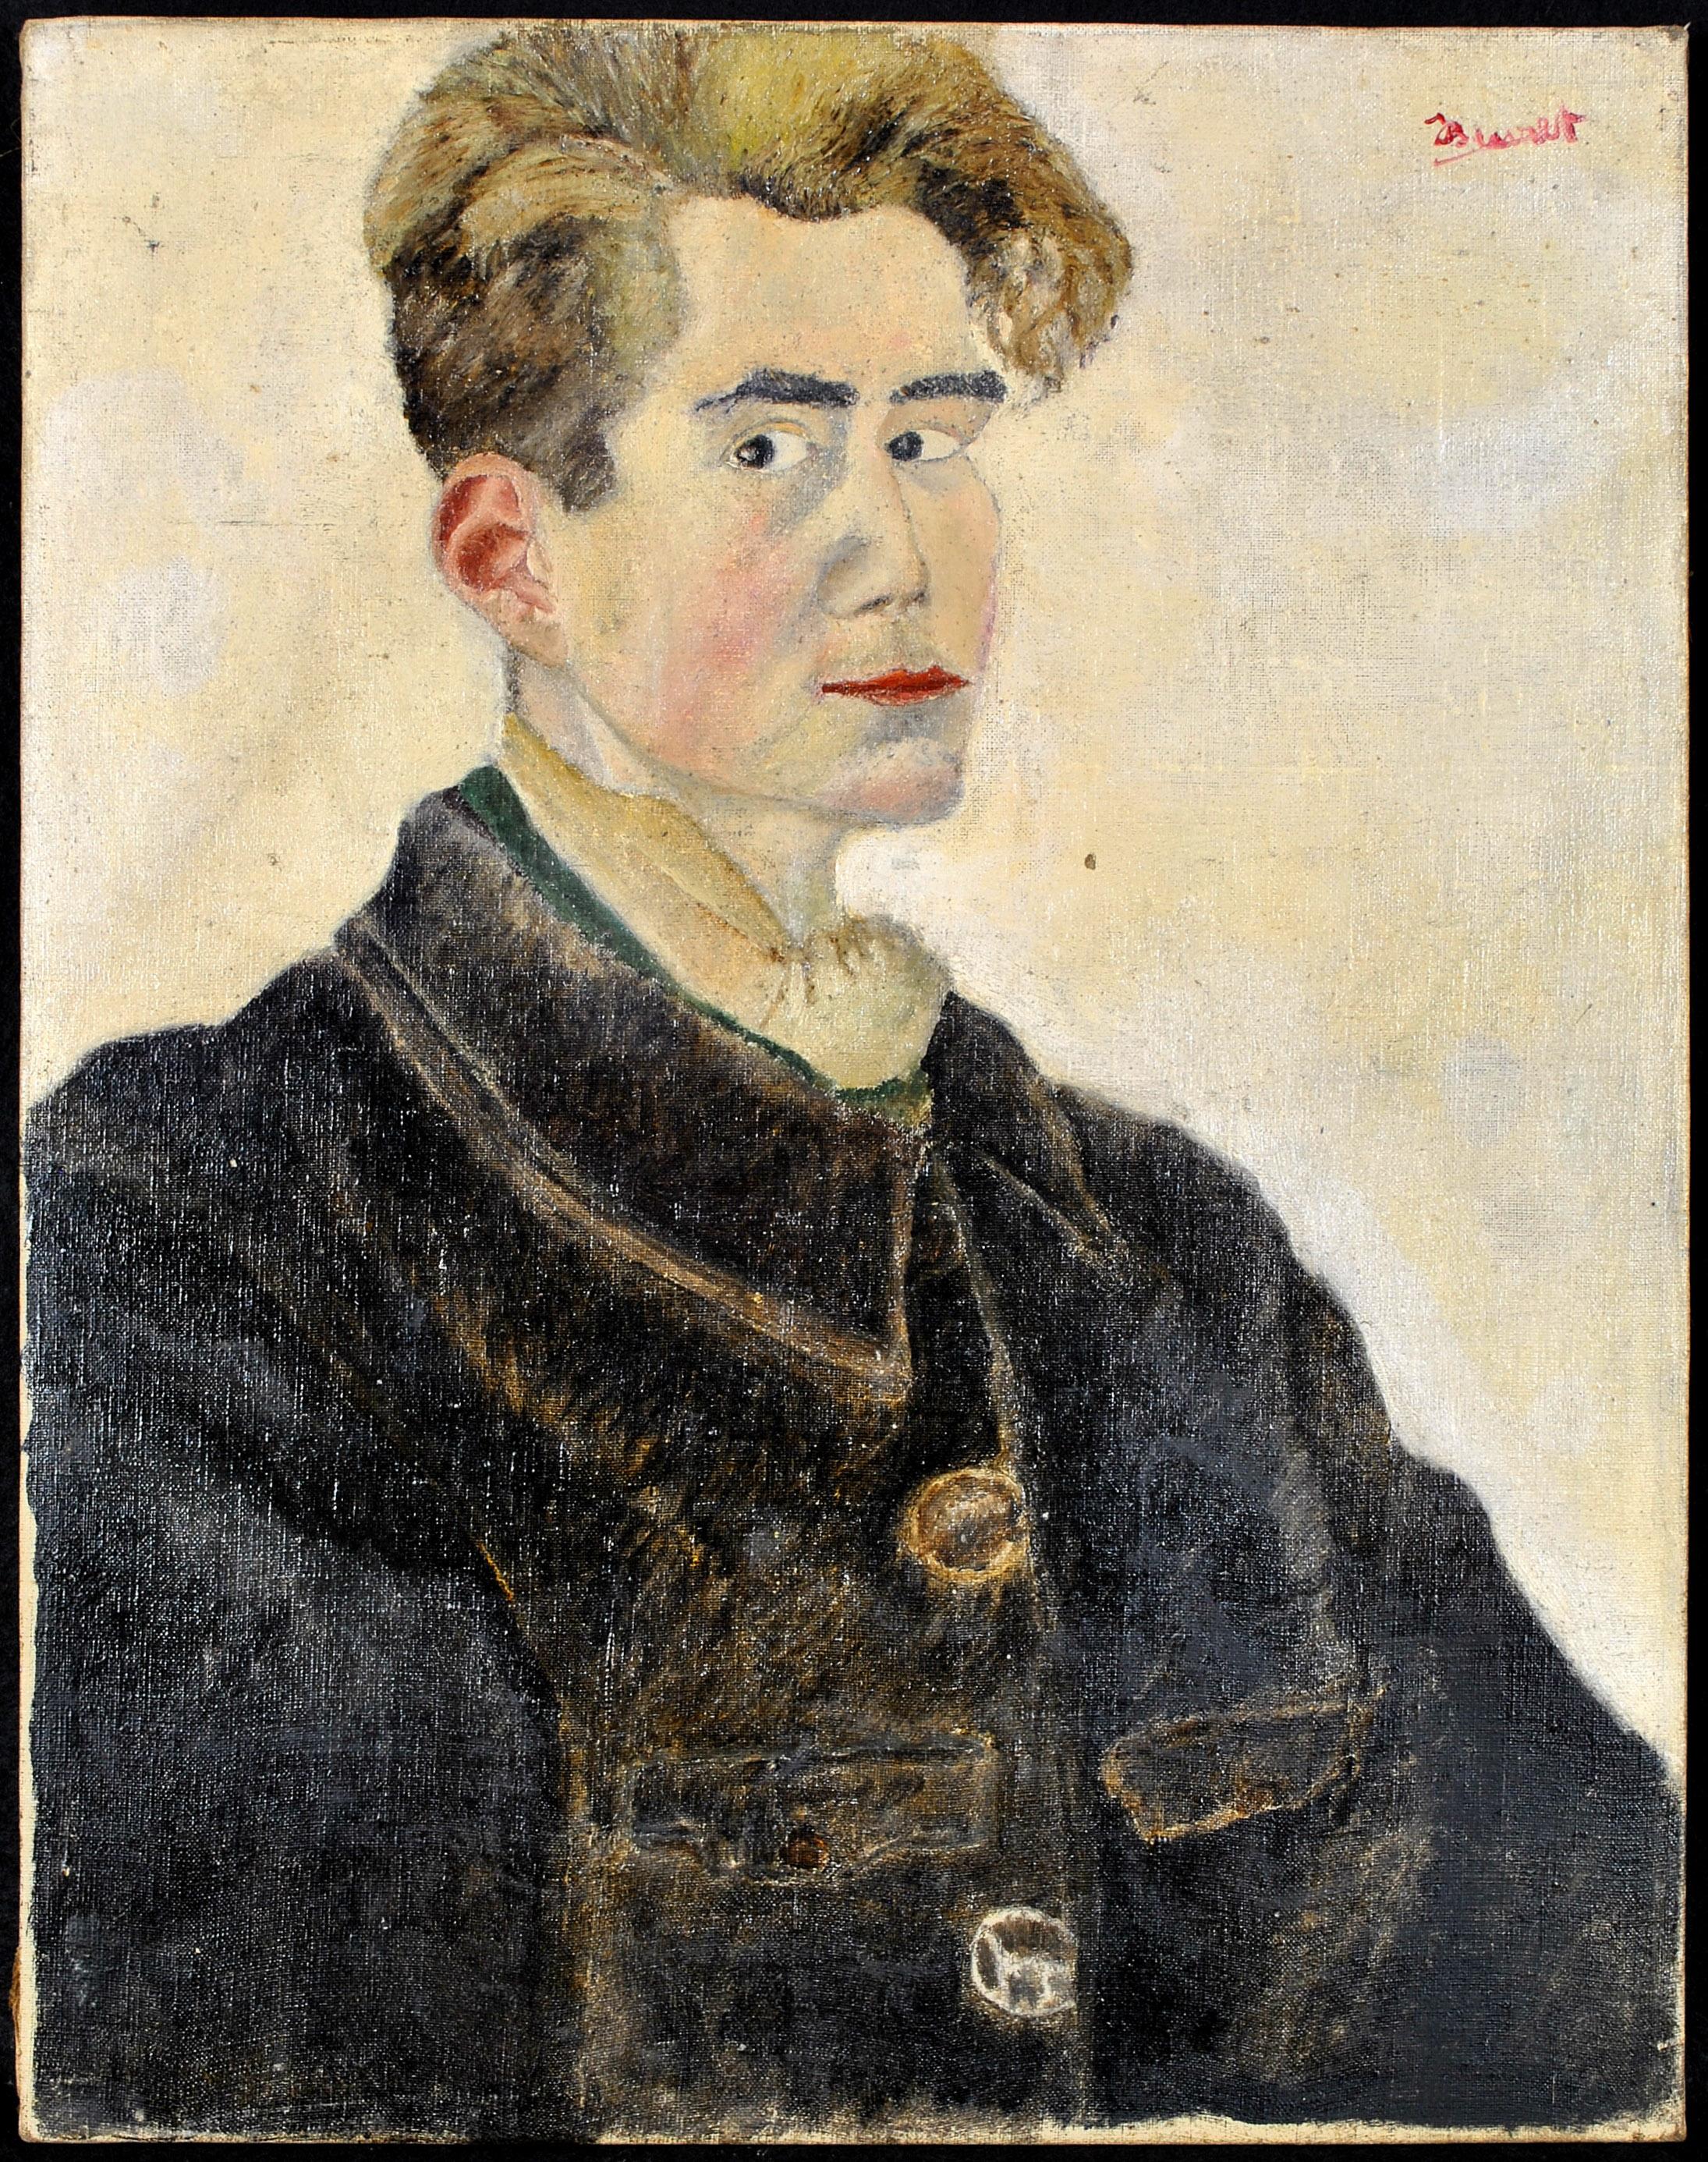 A charming early 20th century french naif oil on canvas portrait of a man wearing a traditional workers jacket and neckerchief. Beautiful and early example of 20th century French naif painting. Indistinctly signed upper right.

Artist: French